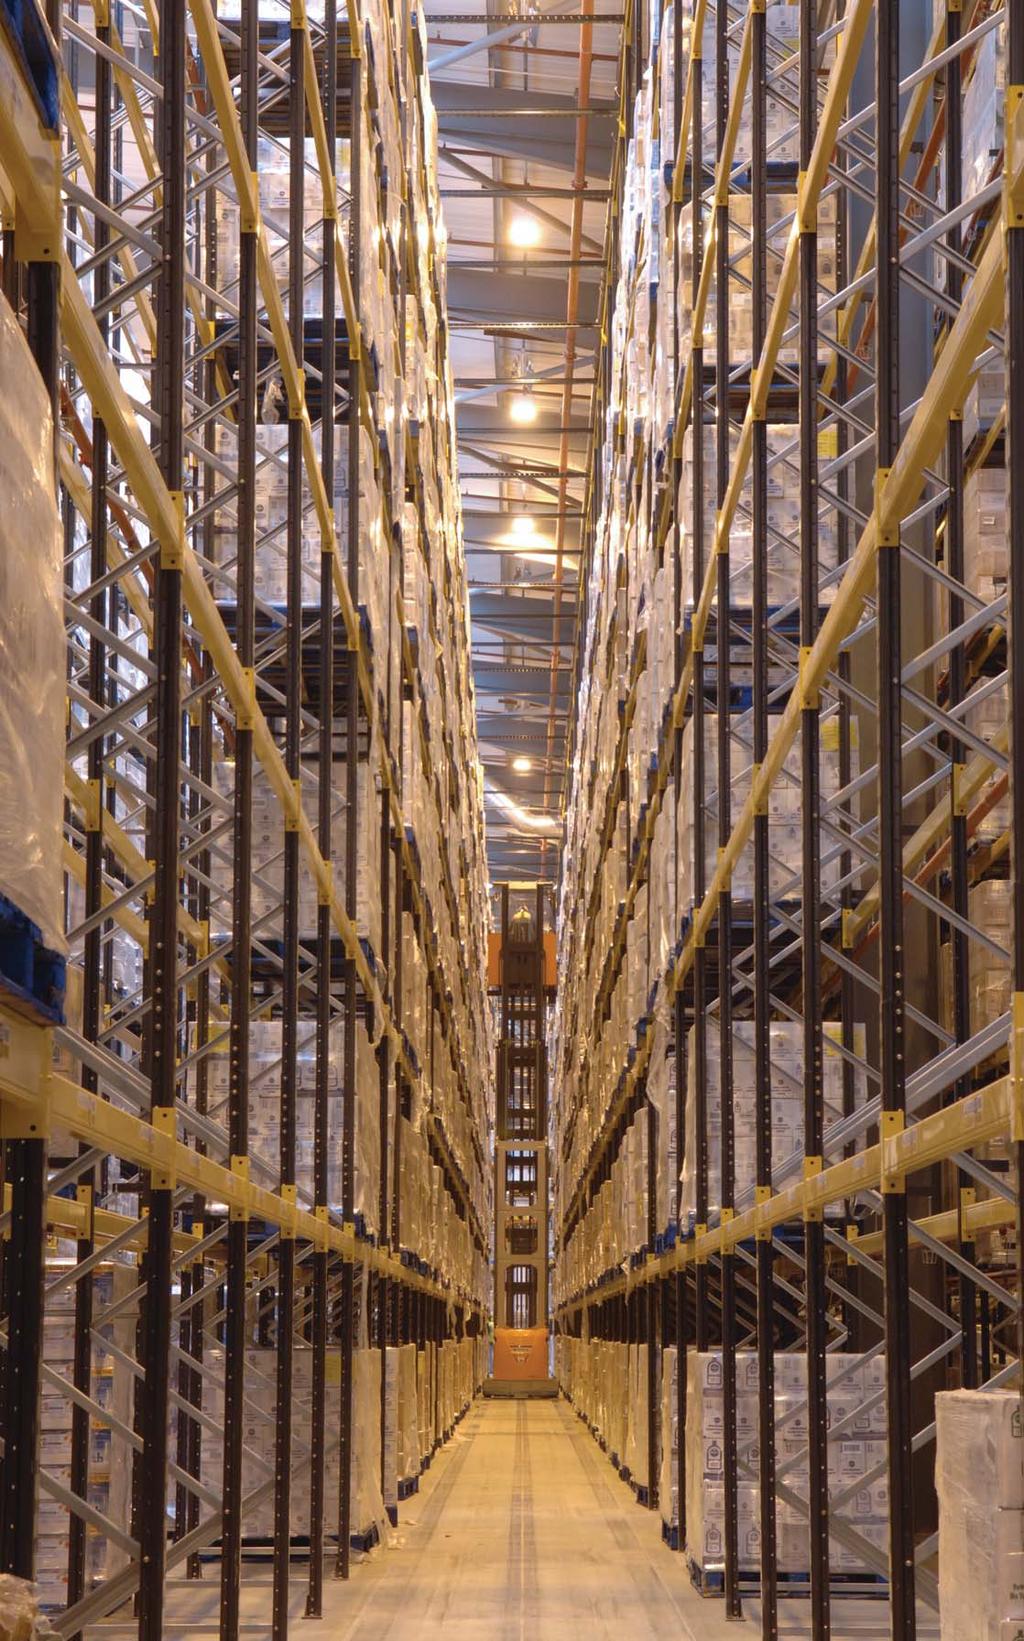 aisle racking is precision designed for safe, efficient load handling within the tight confines of these